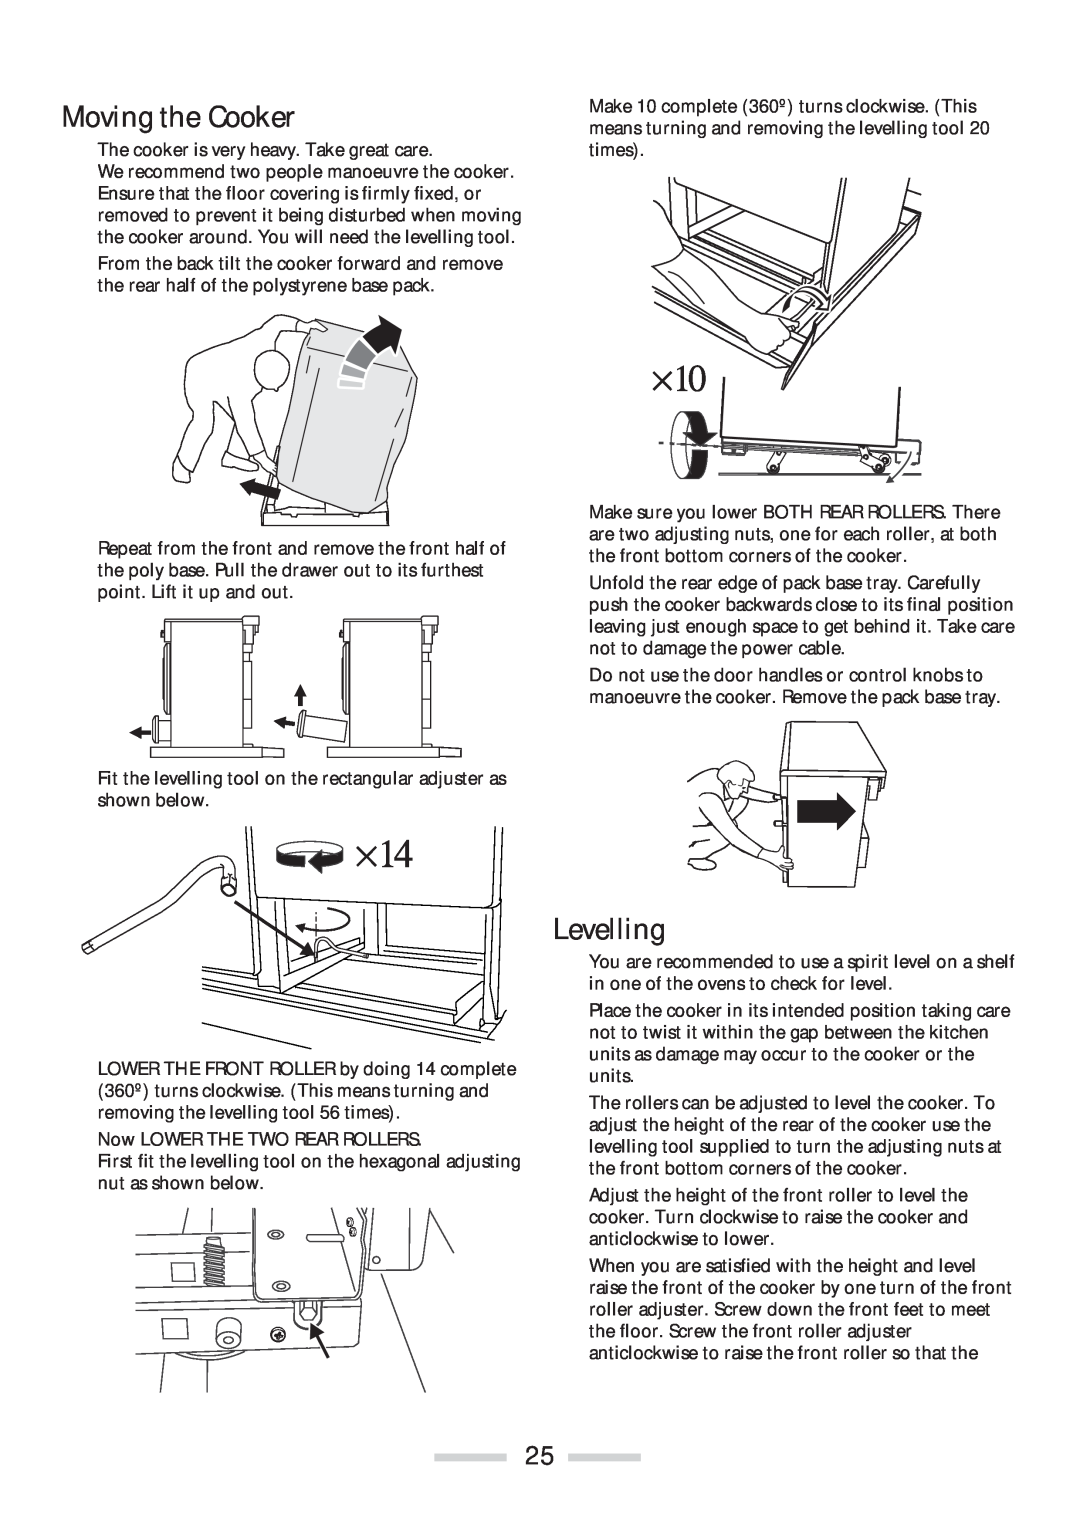 Rangemaster 110 installation instructions Moving the Cooker, Levelling 